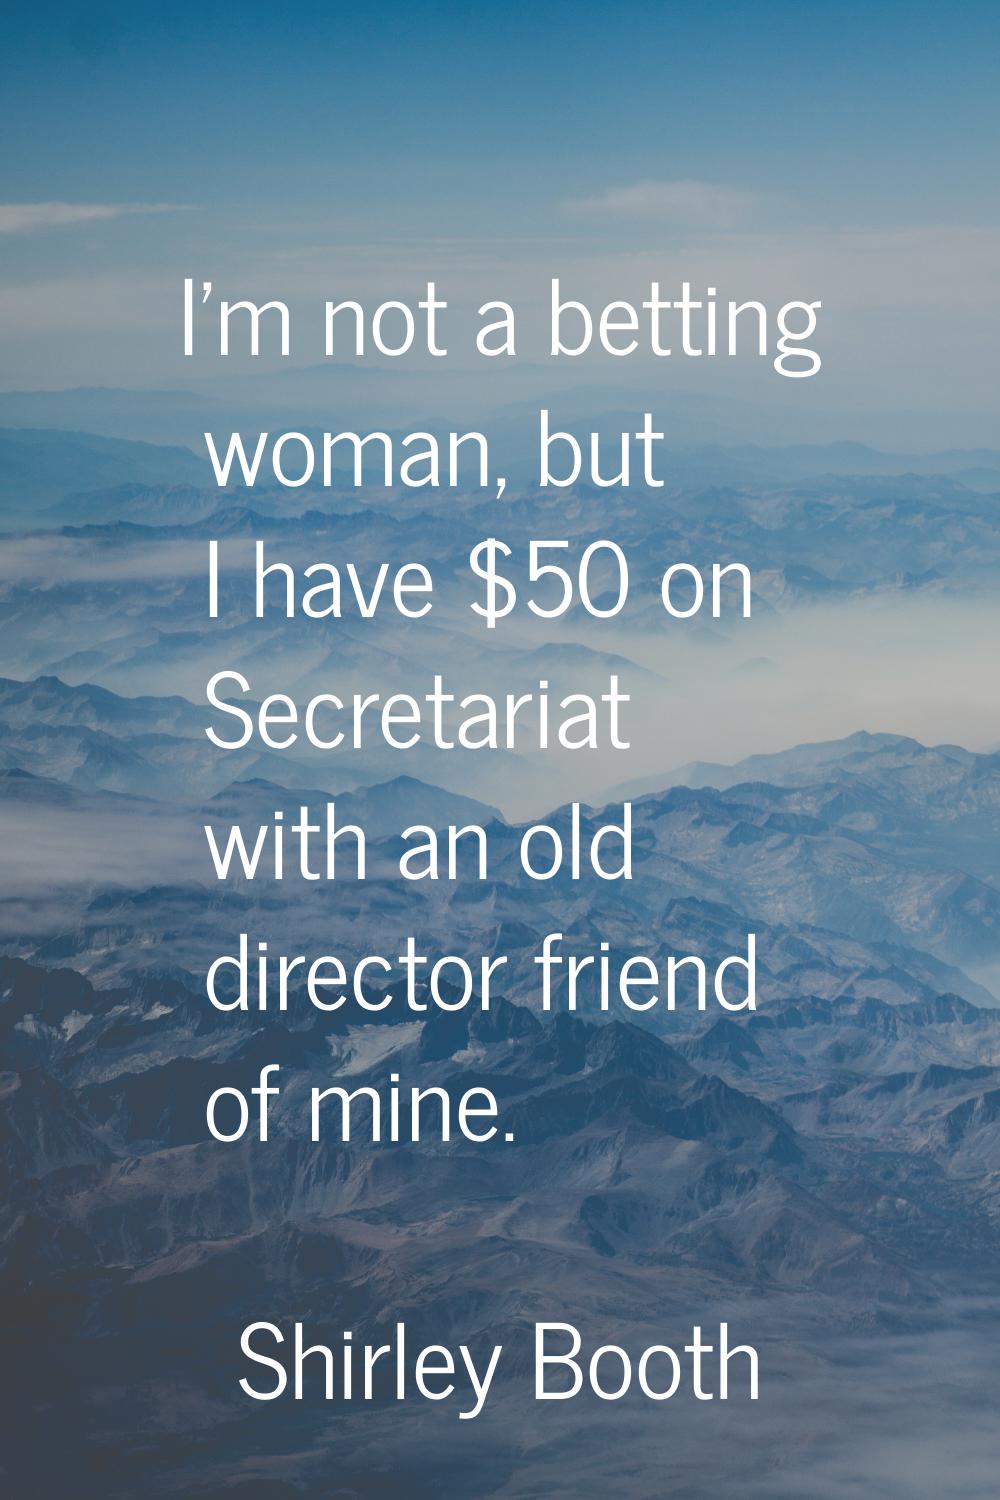 I'm not a betting woman, but I have $50 on Secretariat with an old director friend of mine.